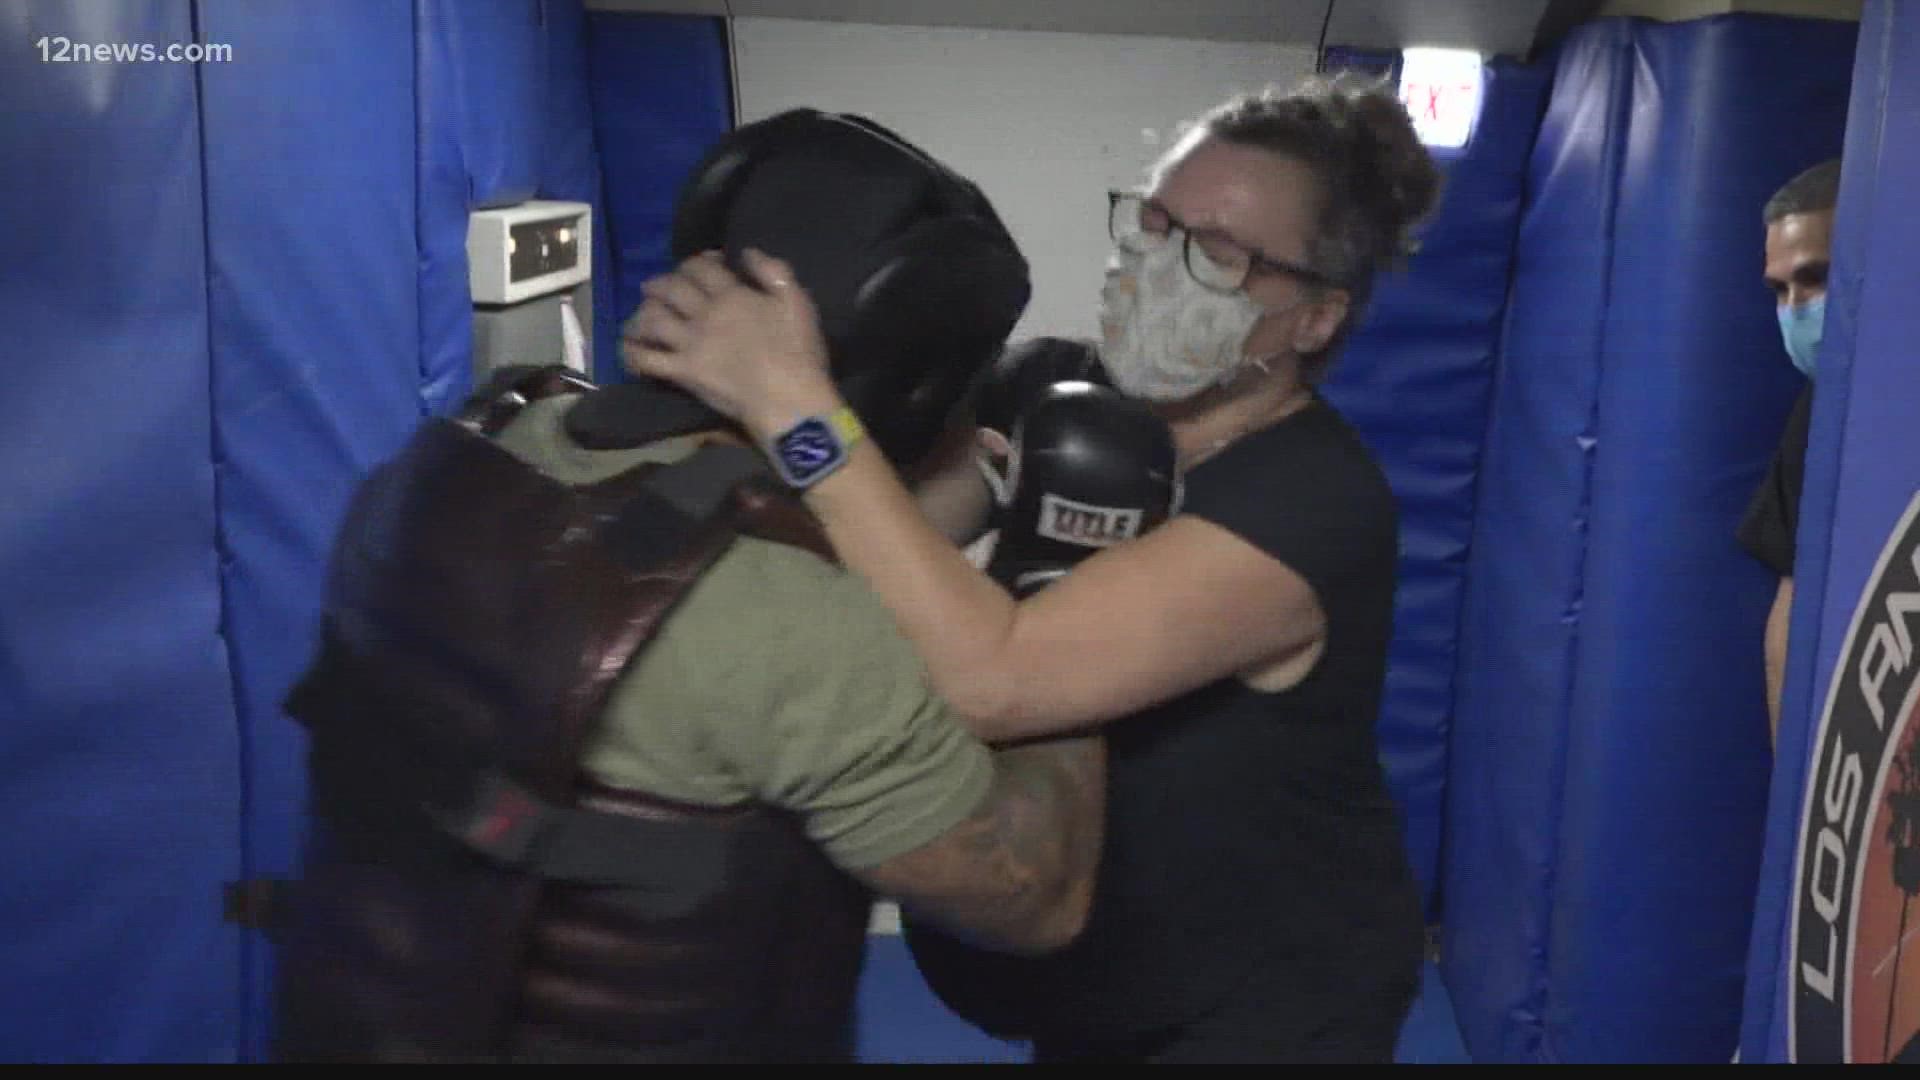 The TSA is resuming its Crew Member Self Defense training course after being put on pause because of COVID-19 restrictions.